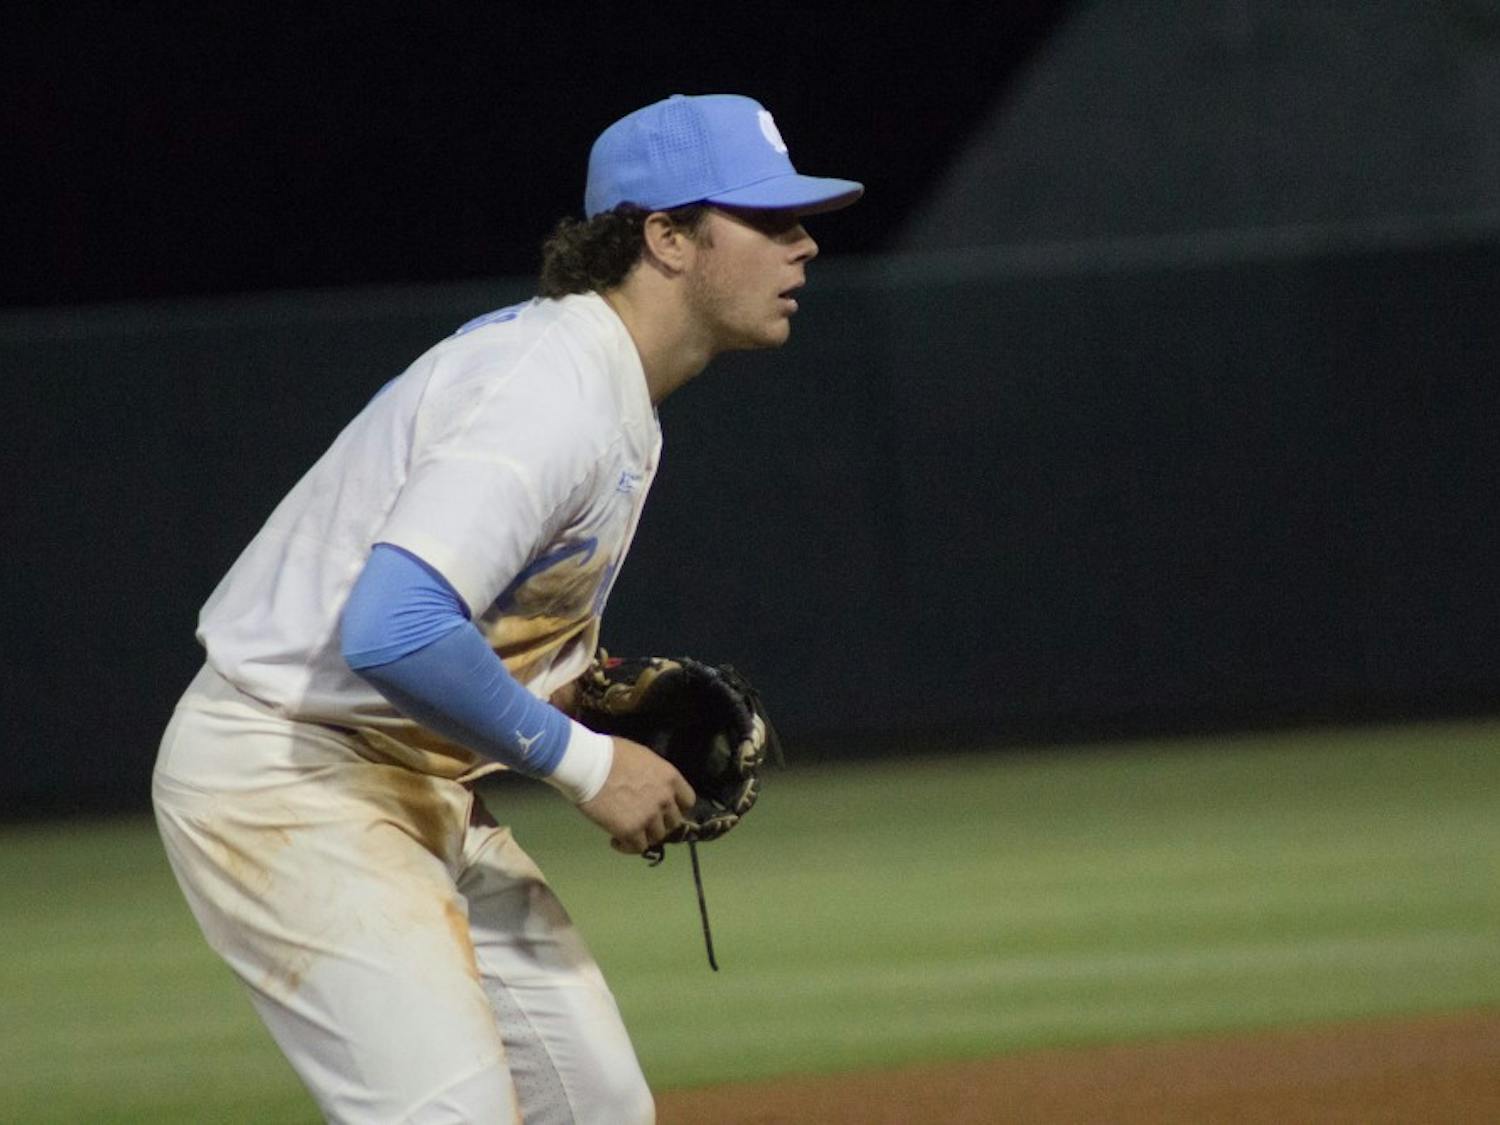 Junior Kyle Datres (3) stands at third base against Appalachian State on April 10 at Boshamer Stadium.